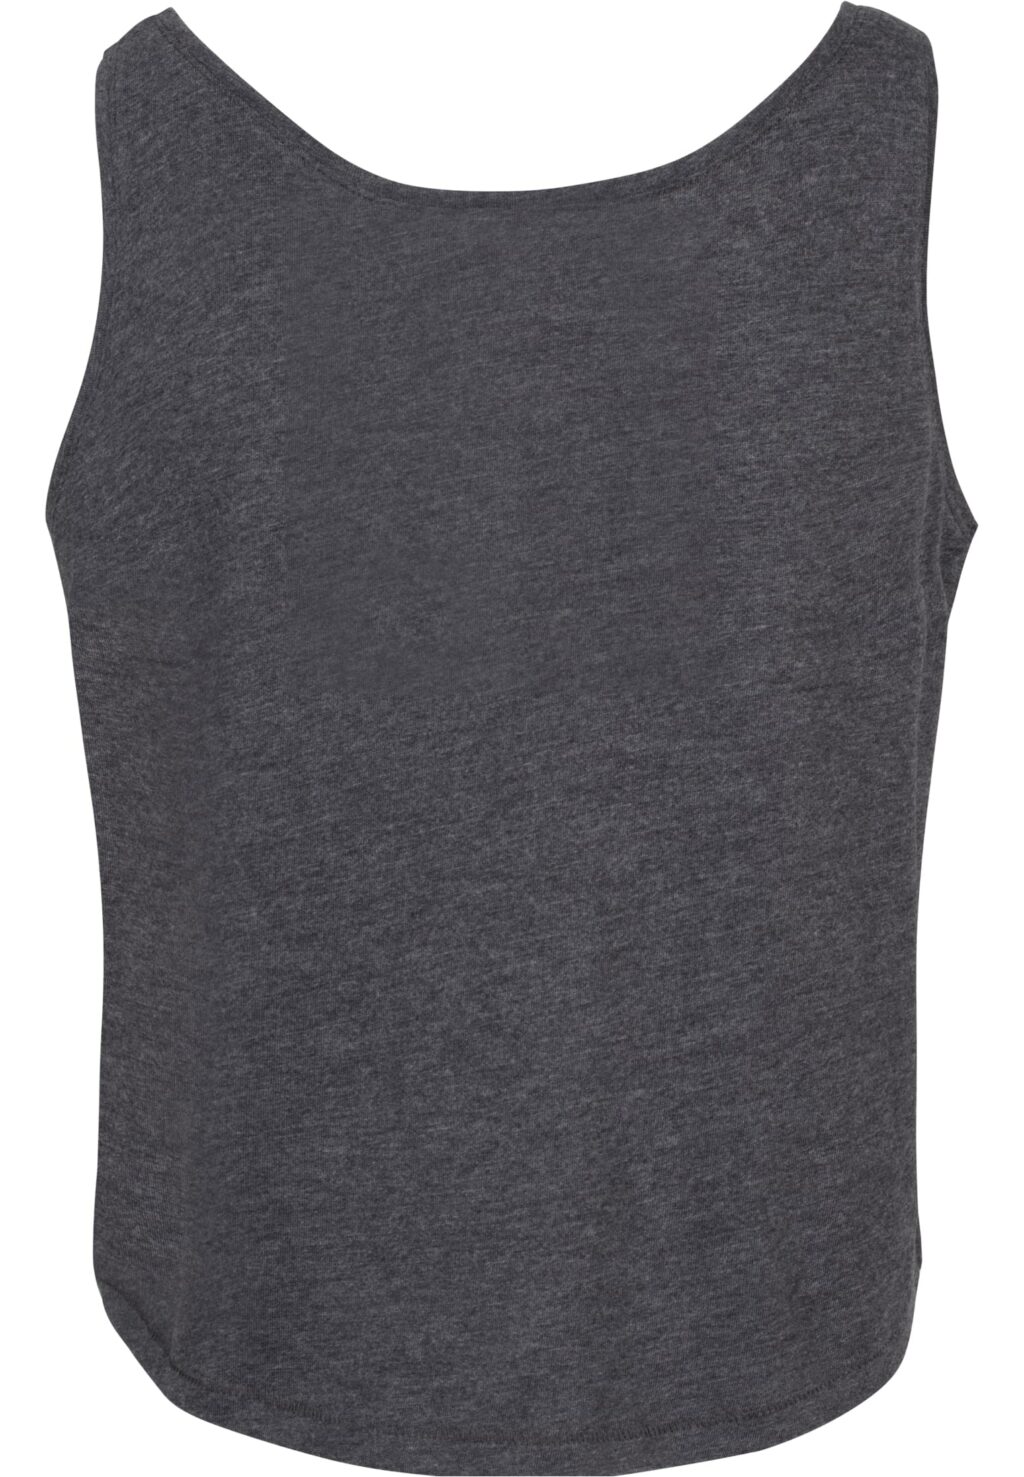 Ladies Waiting For Friday Box Tank charcoal MT2523